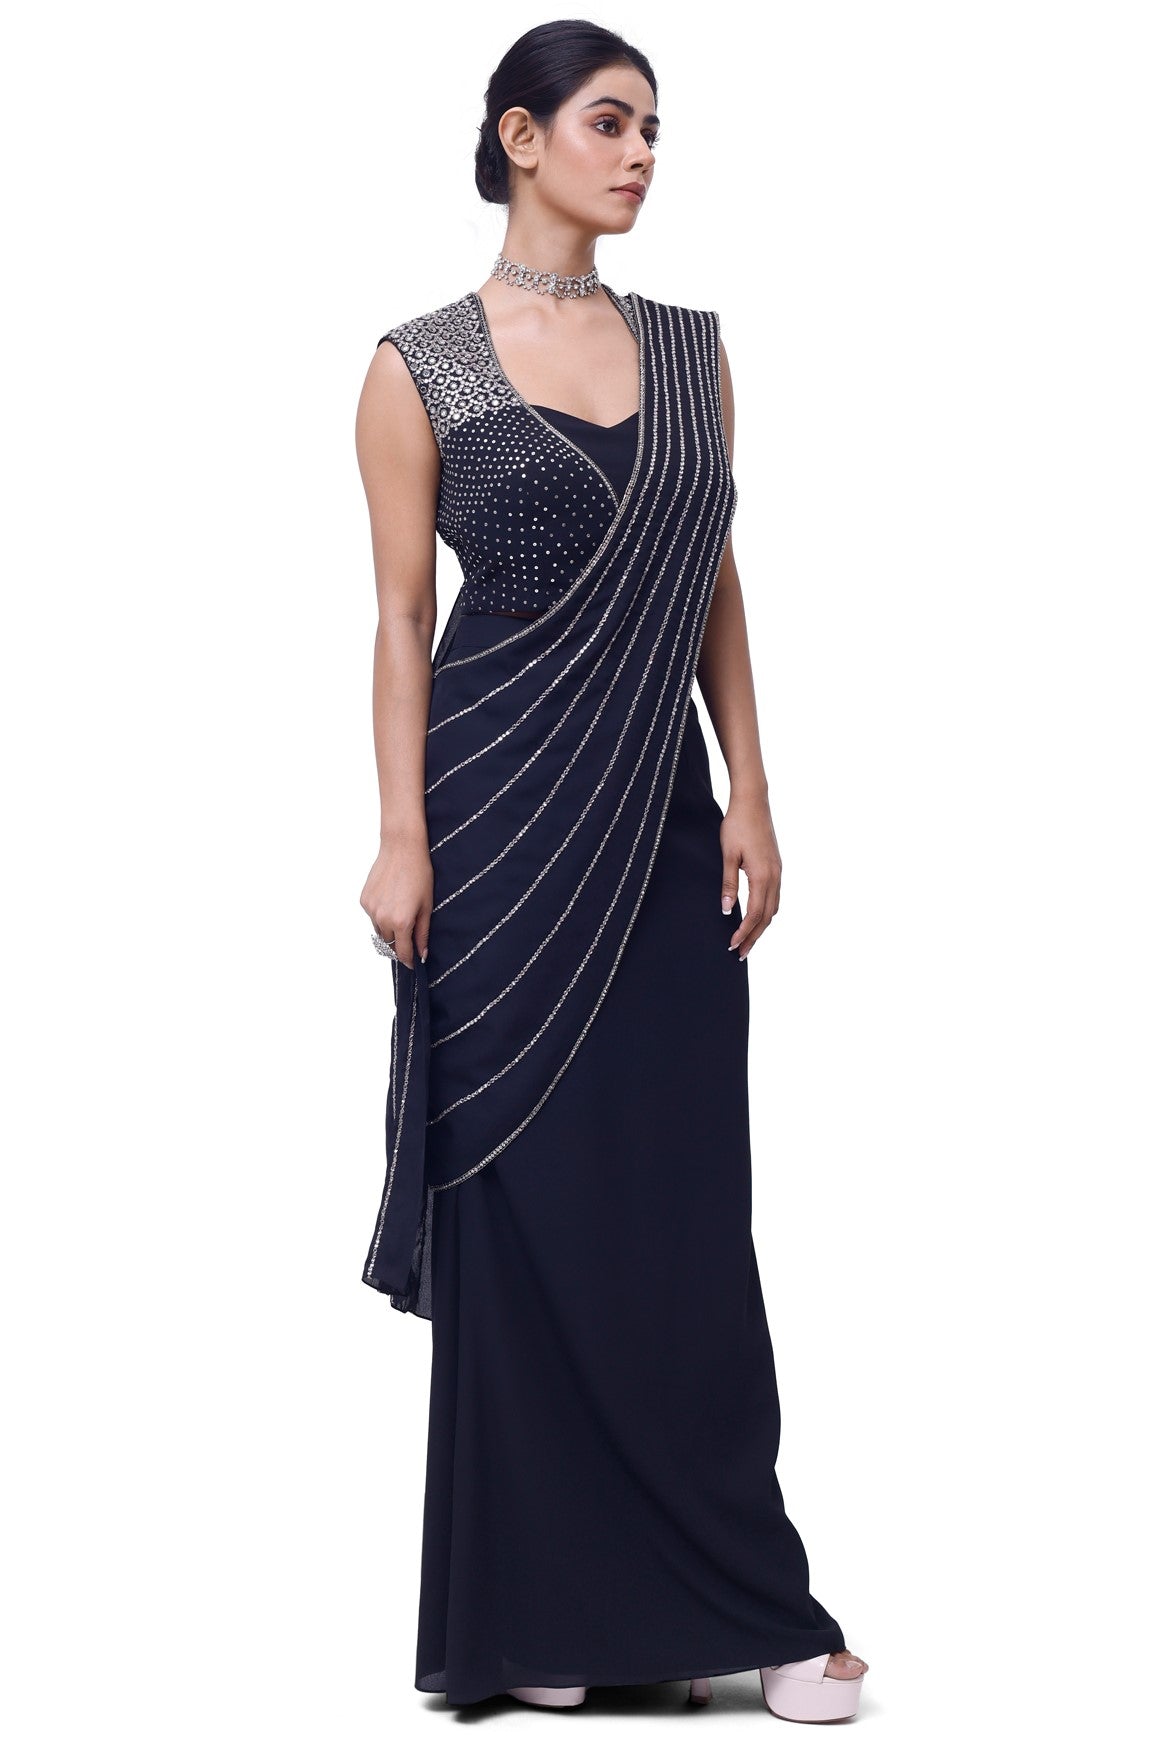 Shop navy blue side slit georgette saree online in USA. Look your best at parties and weddings in beautiful designer sarees, embroidered sarees, handwoven sarees, silk sarees, organza saris from Pure Elegance Indian saree store in USA.-full view